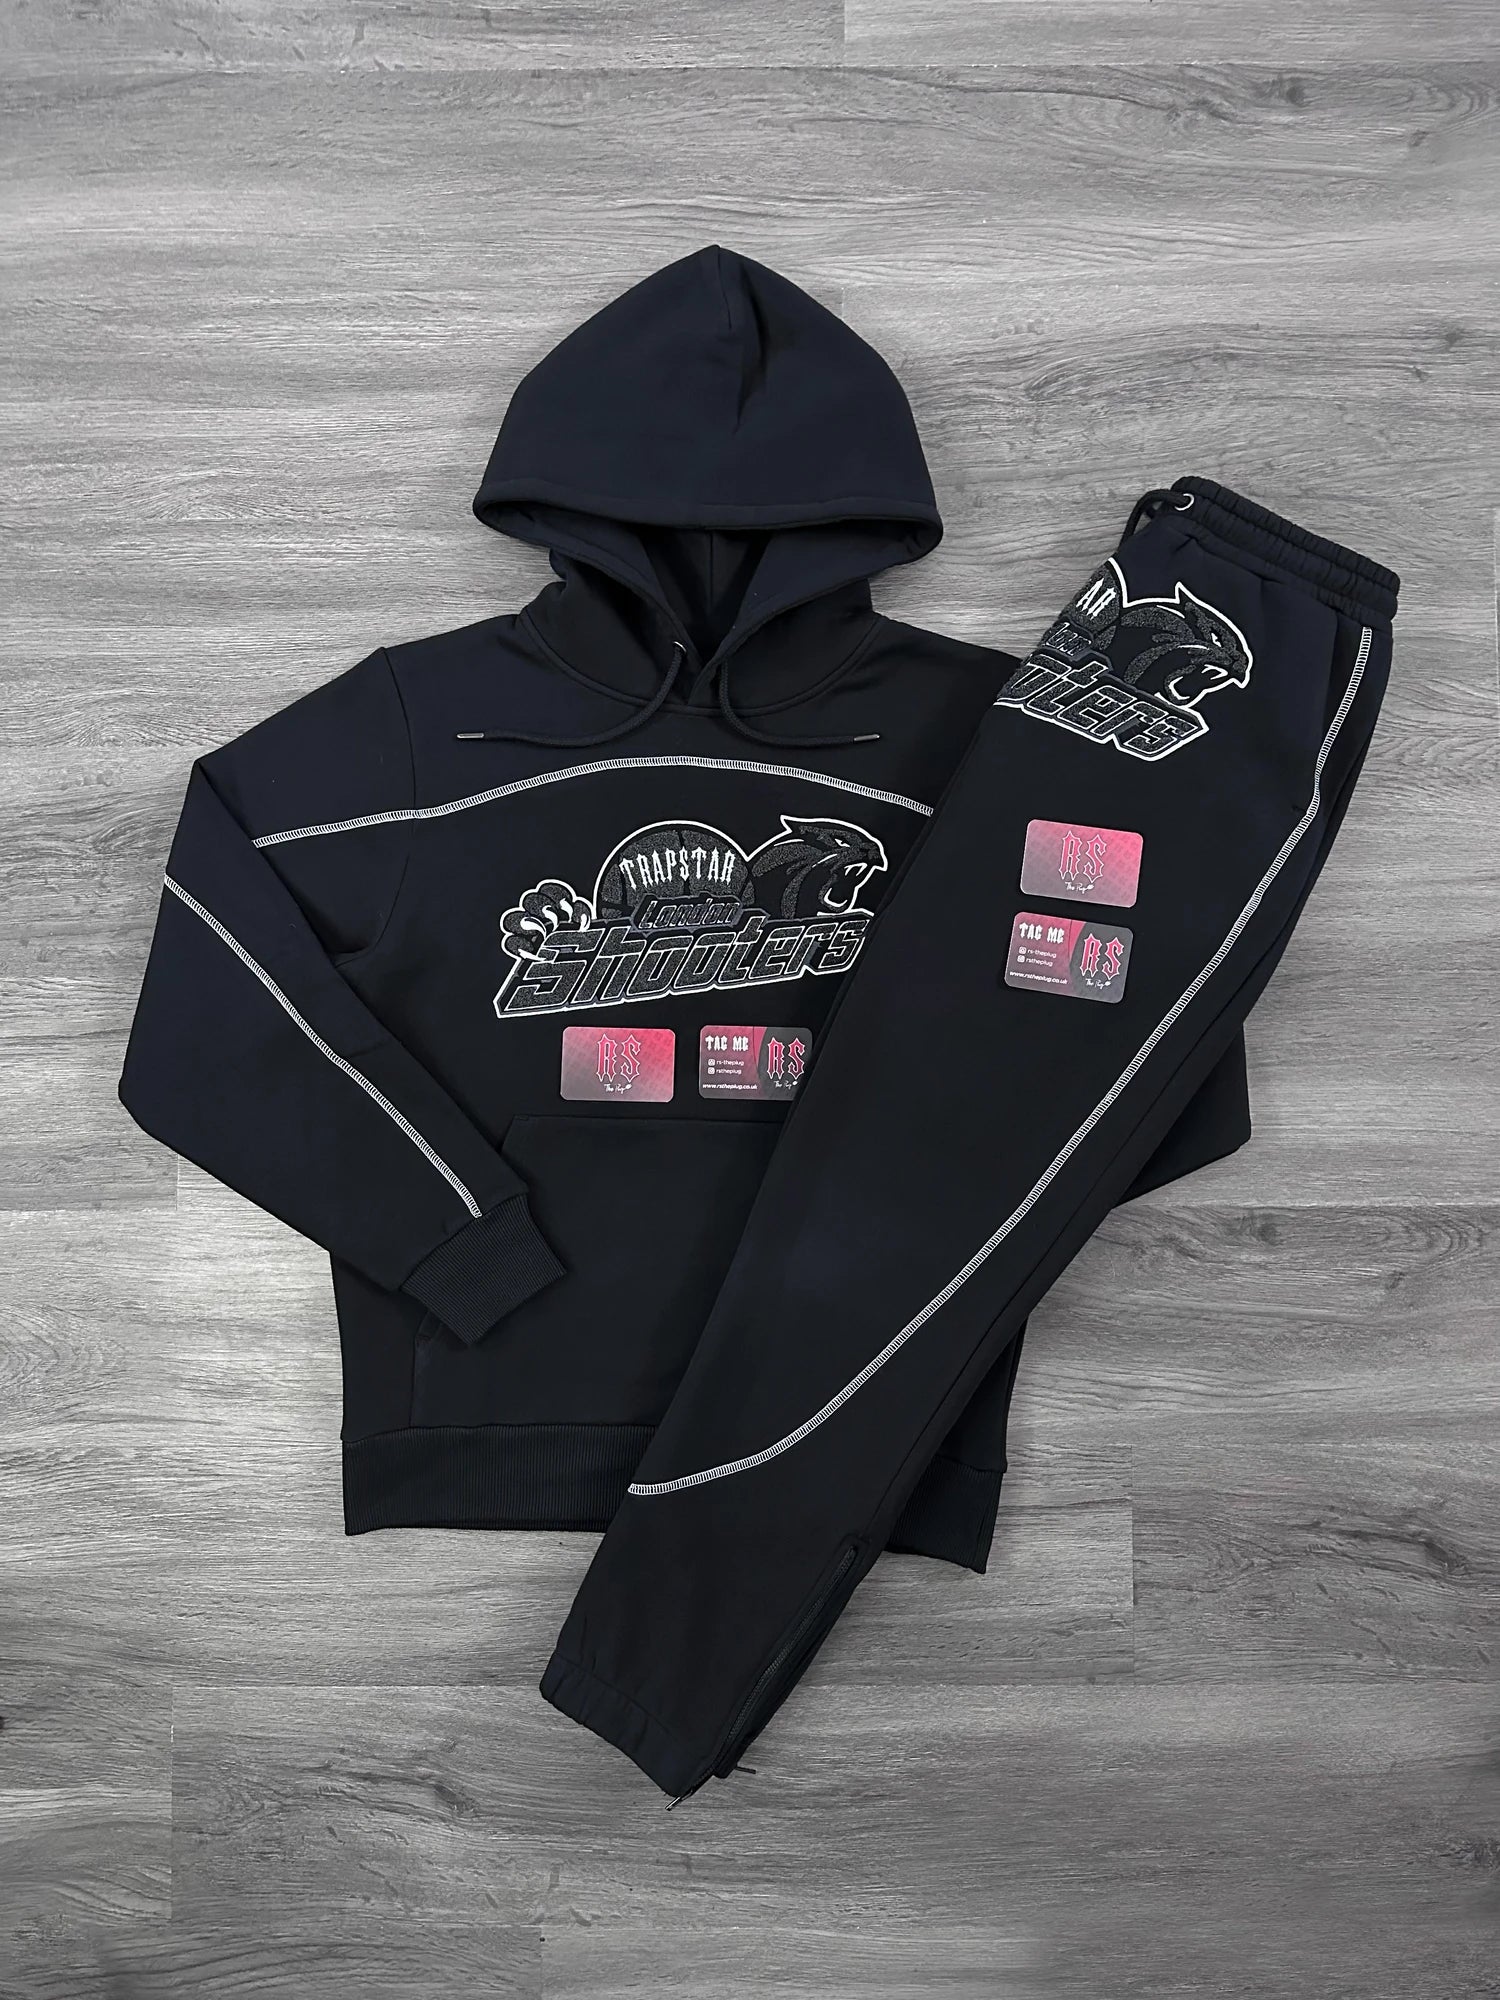 Trapstar Arch Shooters Tracksuit Blackout